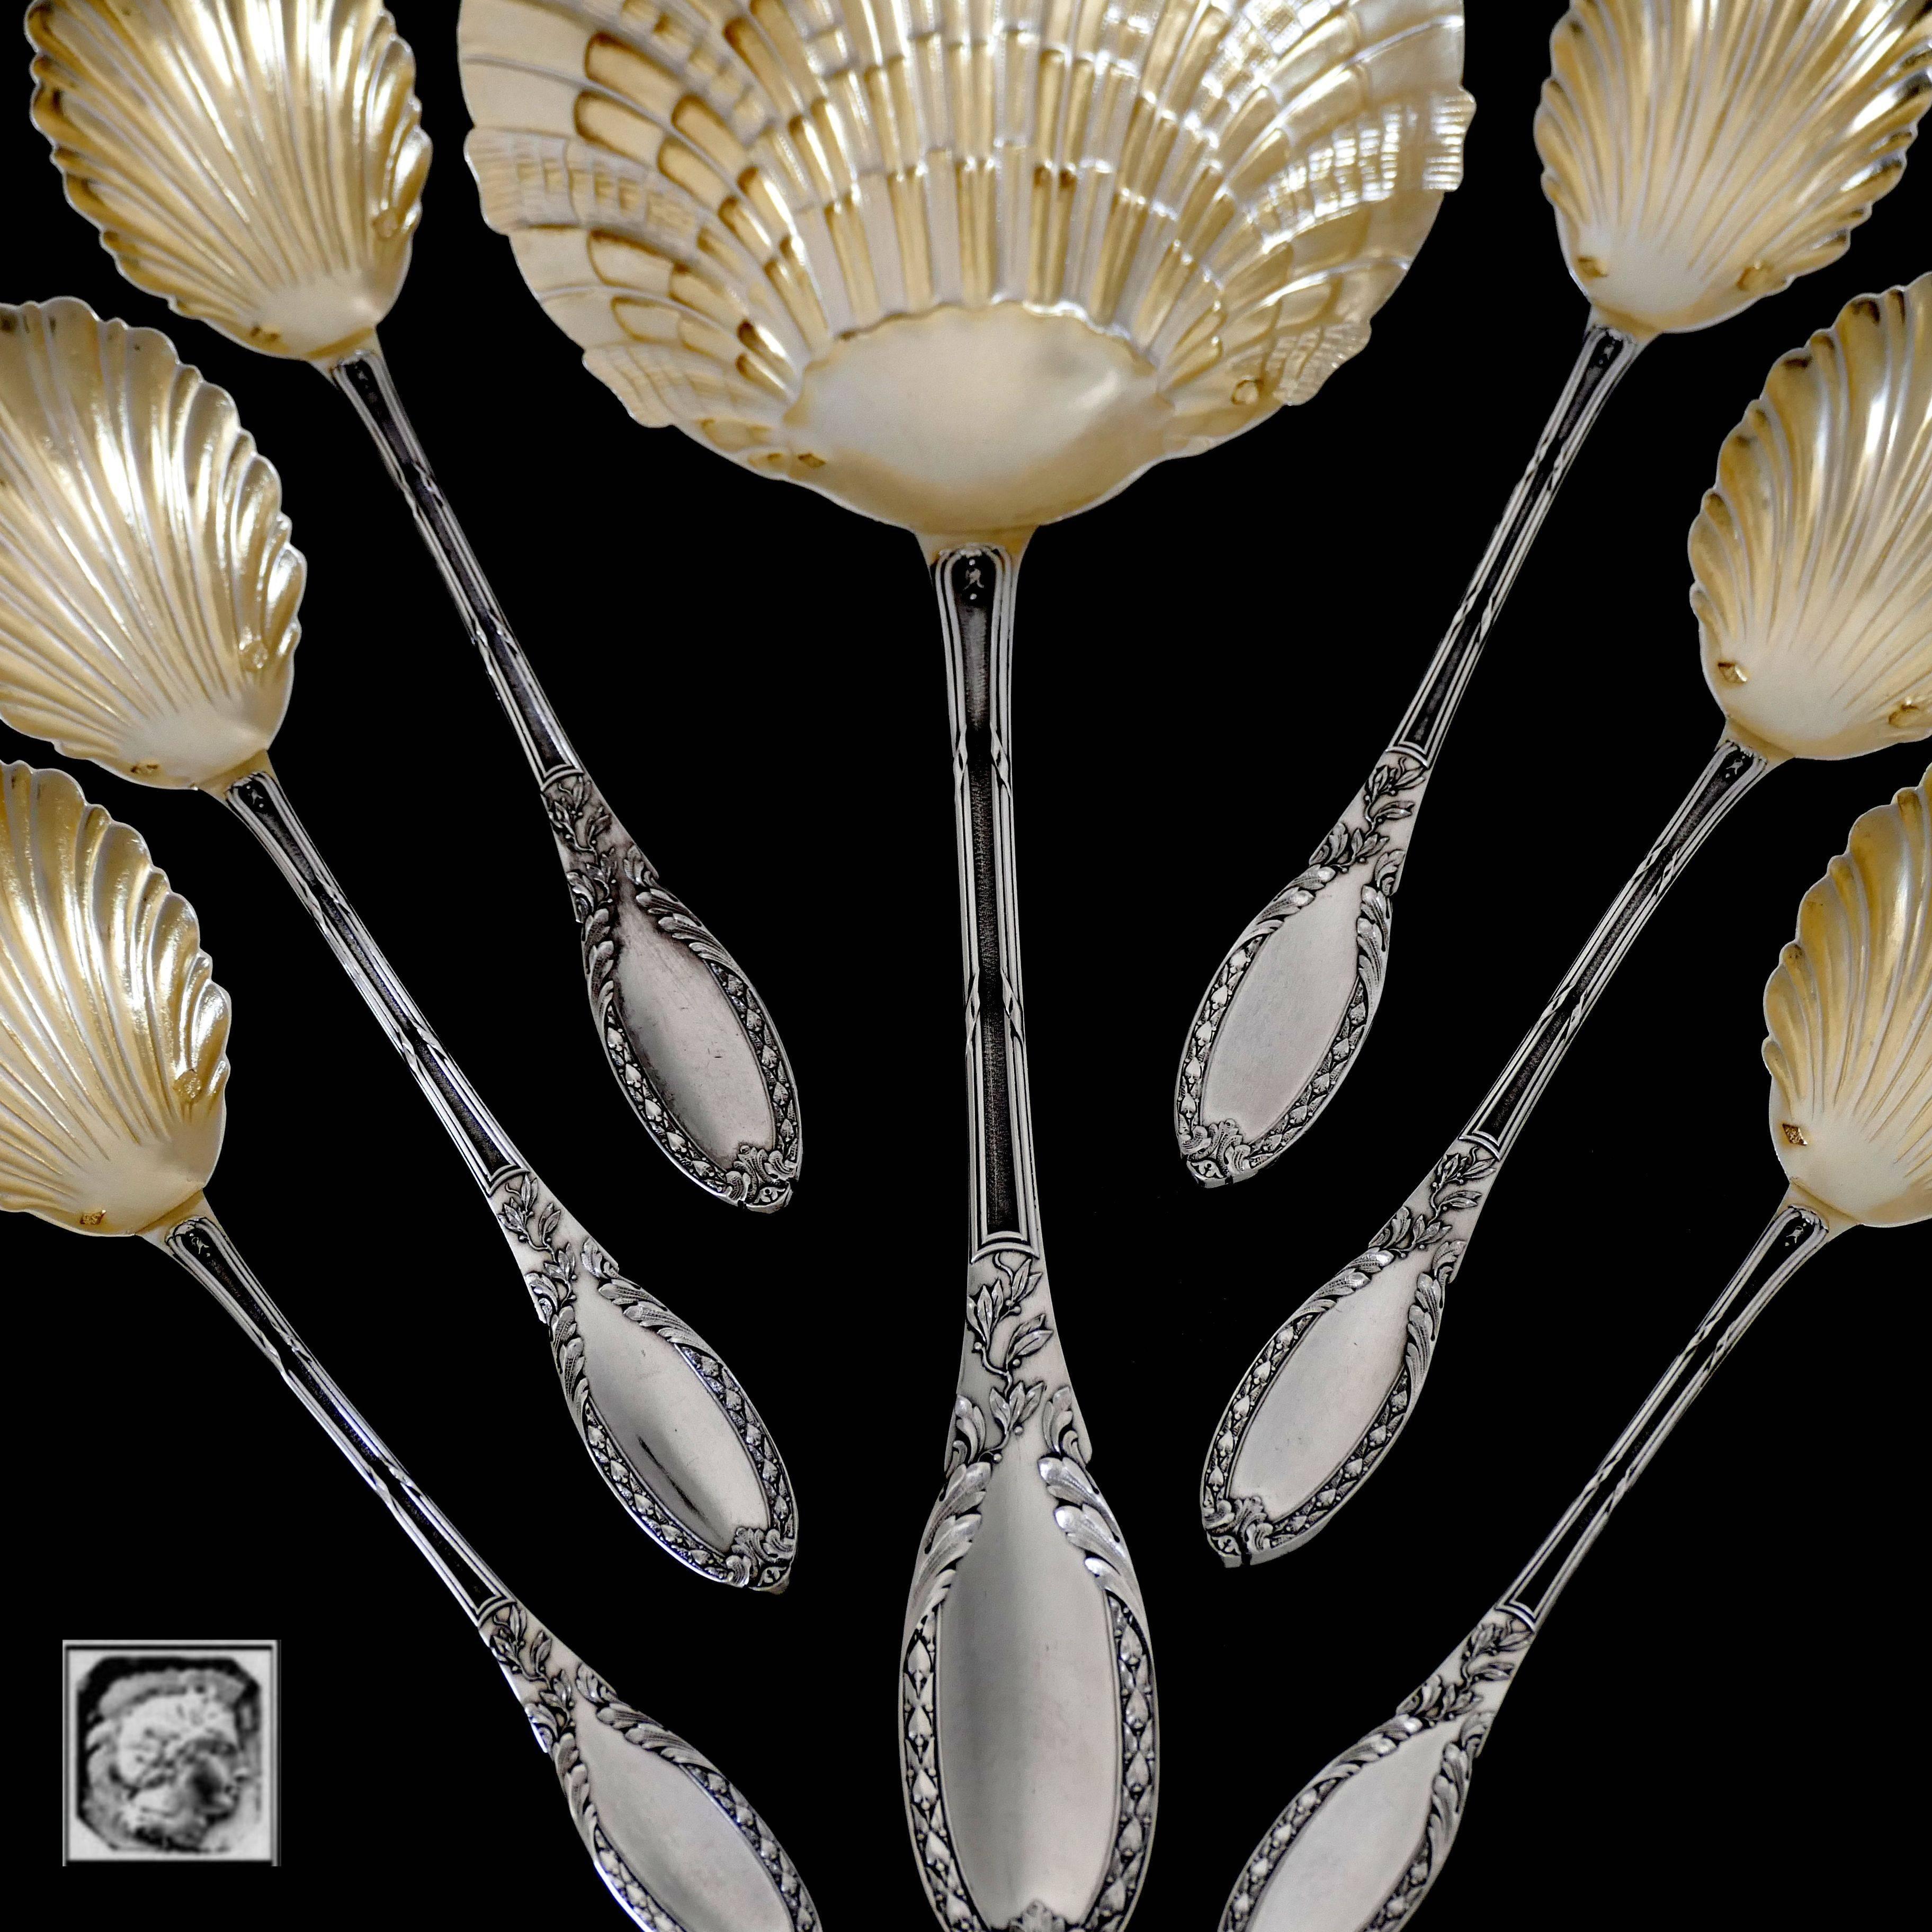 Rare French Sterling Silver 18-Karat Gold Strawberry Service Seven-Piece For Sale 5